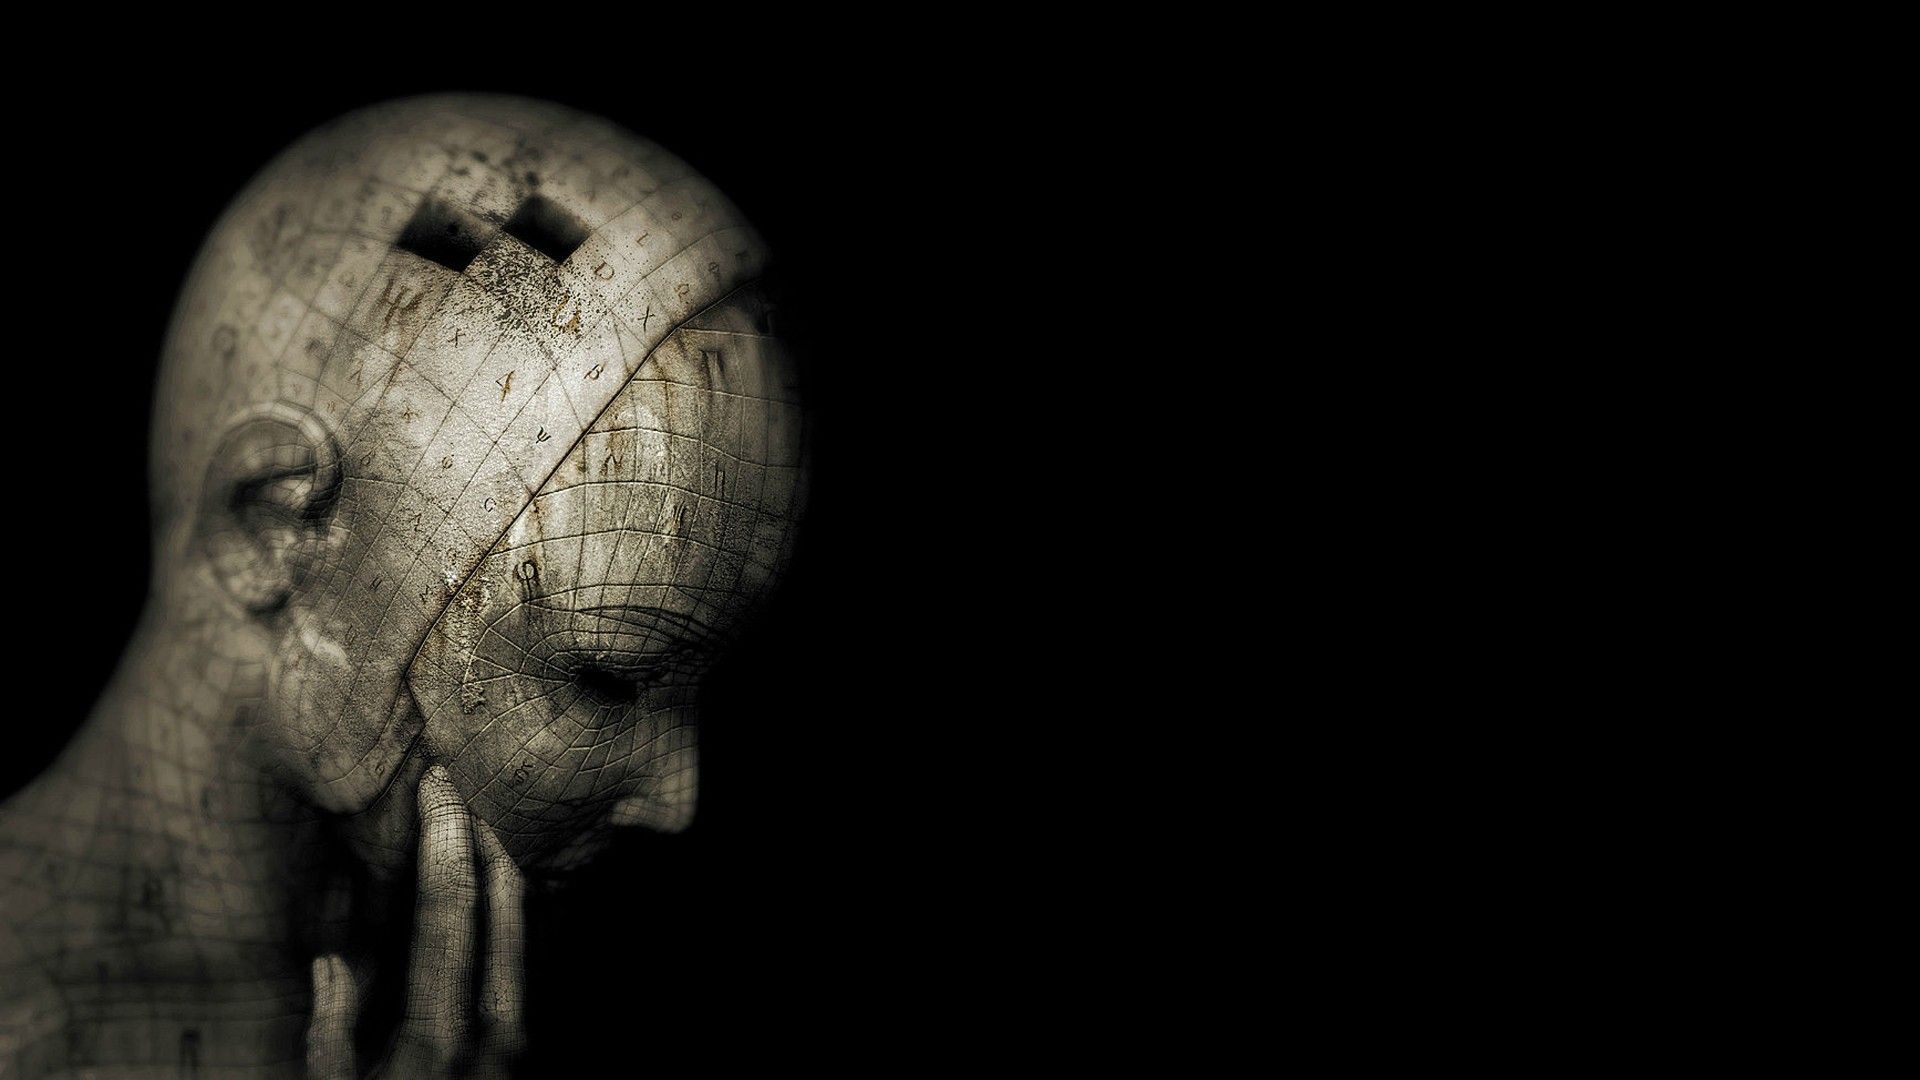 Head on a black background wallpapers and images - wallpapers ...